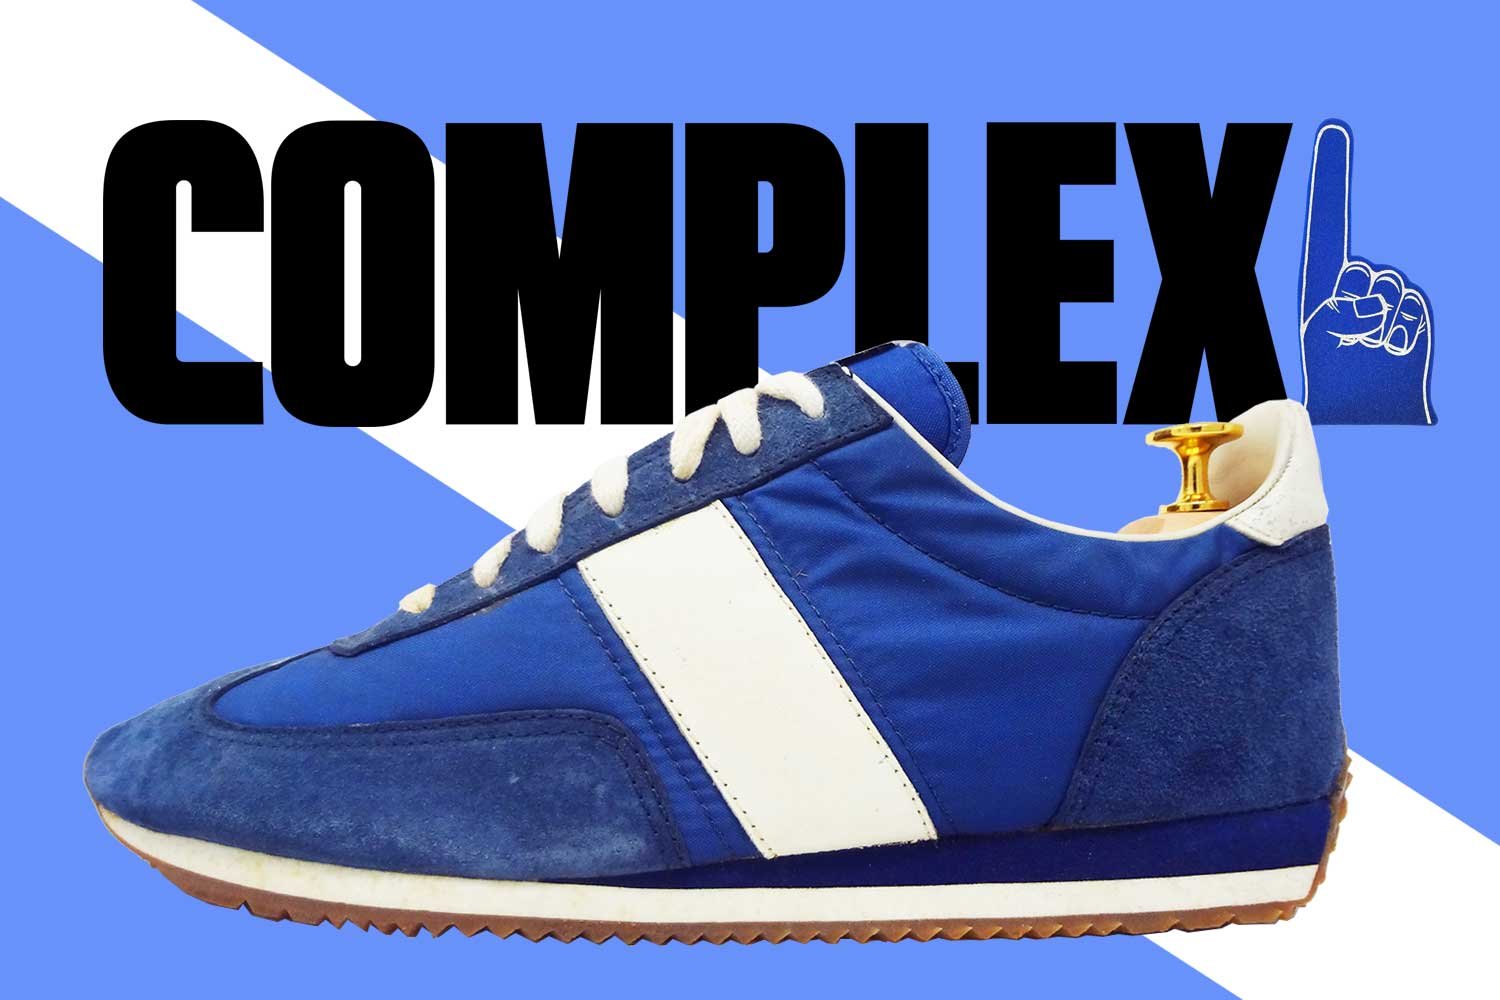 knockoff sneakers — The Deffest®. A vintage and retro sneaker blog. — Blog